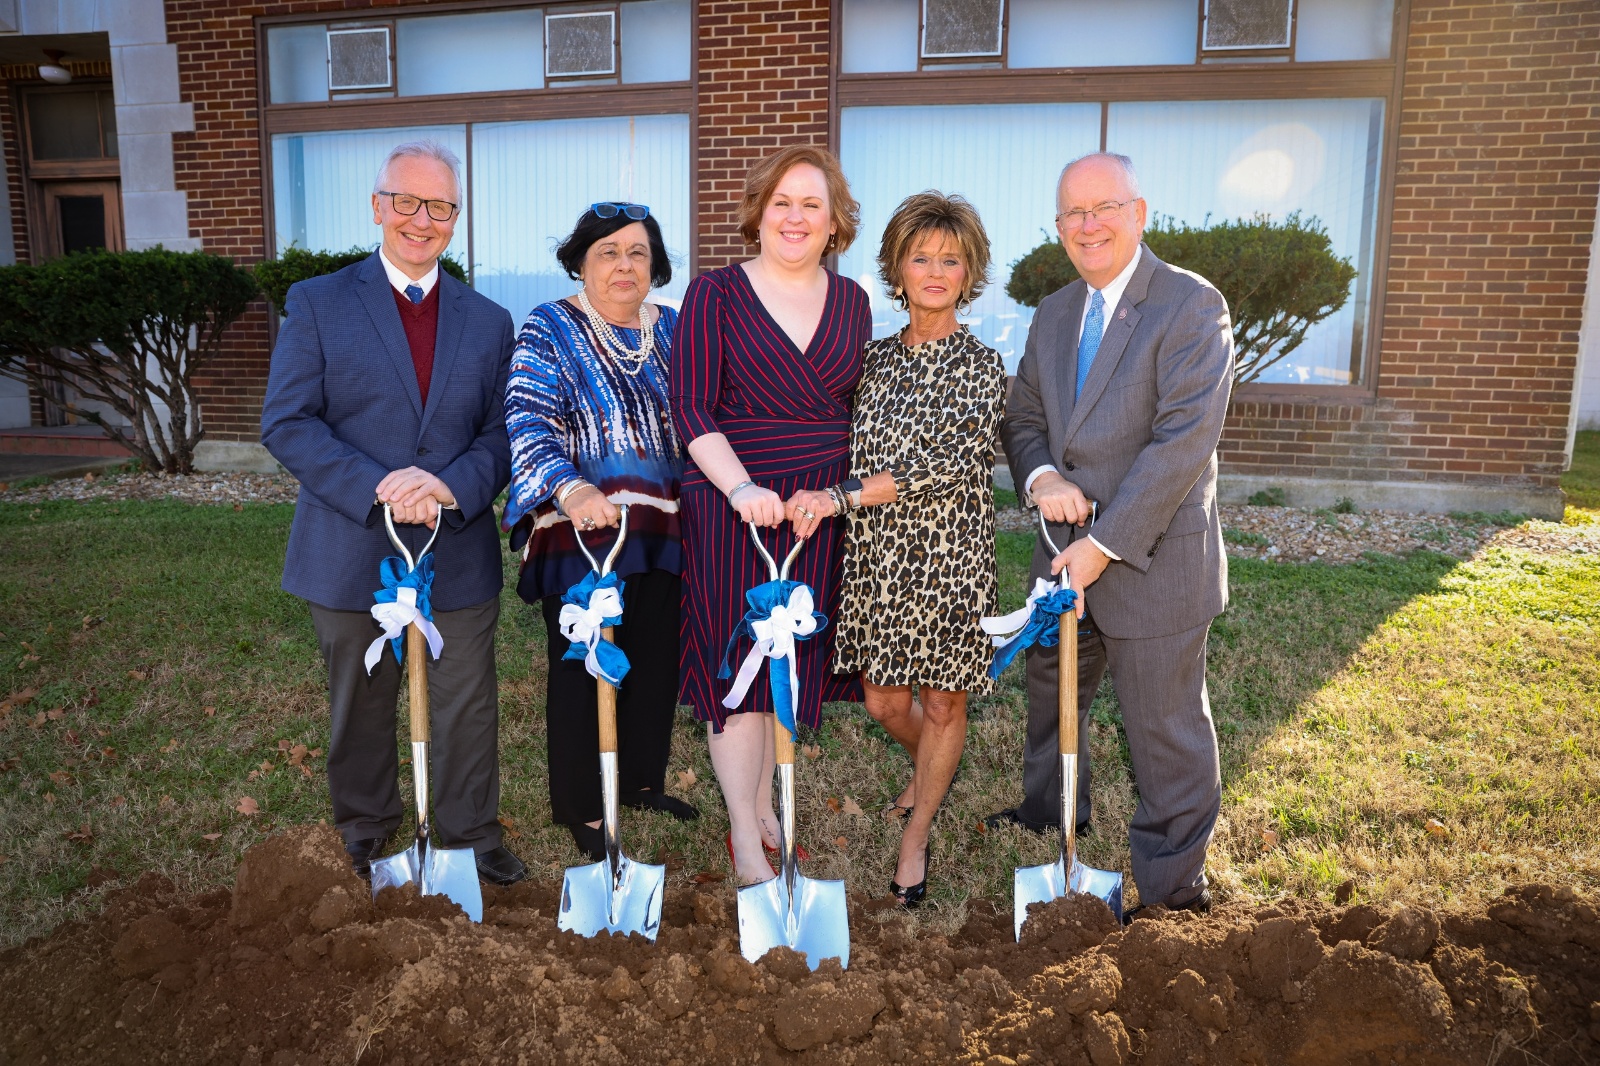 Five people hold shovels preparing to break ground on construction project